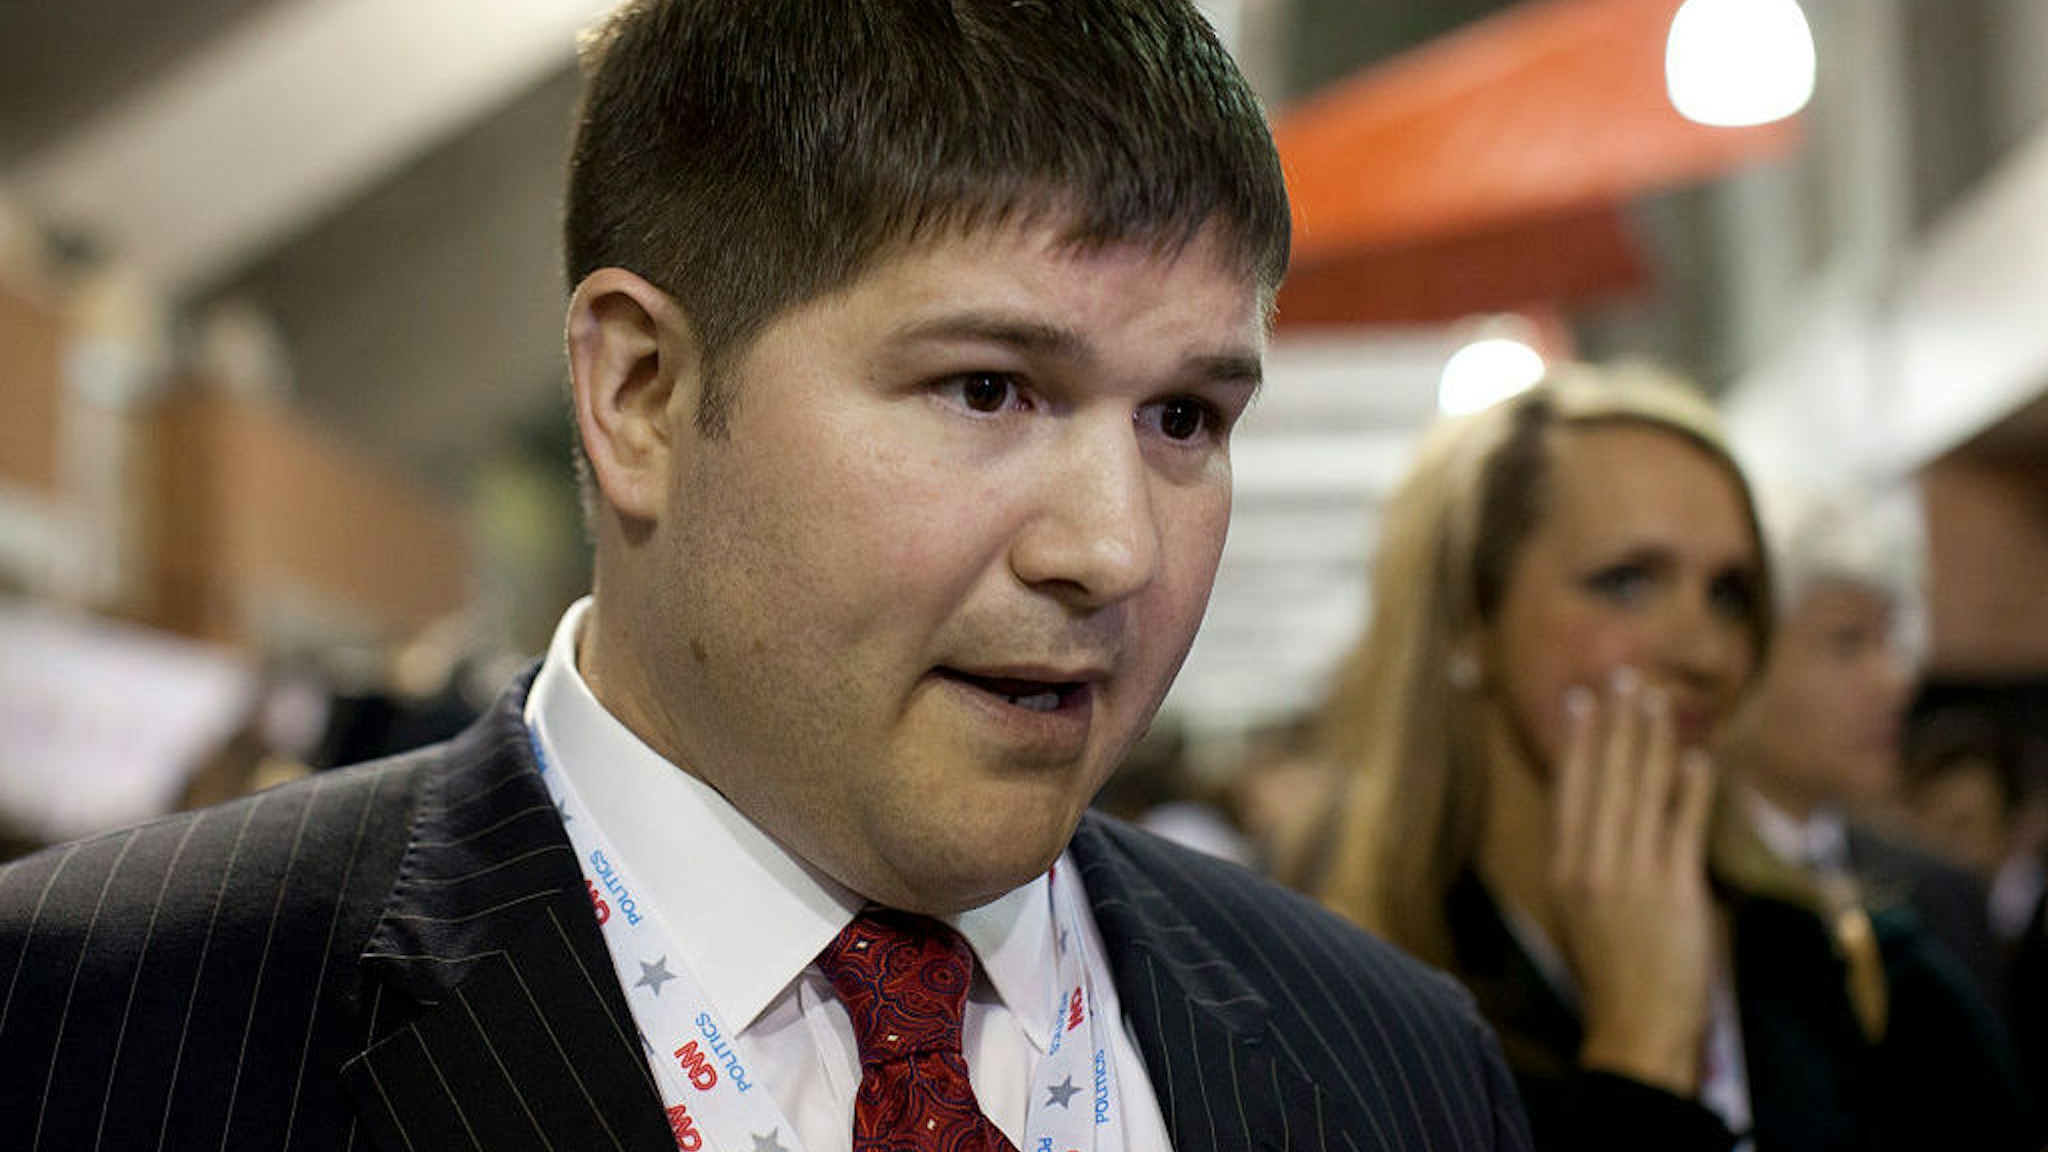 Jesse Benton, spokesman for the Ron Paul campaign, speaking to reporters in the spin room after the CNN Debate on January 1, 2012. (Photo by Robert Daemmrich Photography Inc/Corbis via Getty Images)